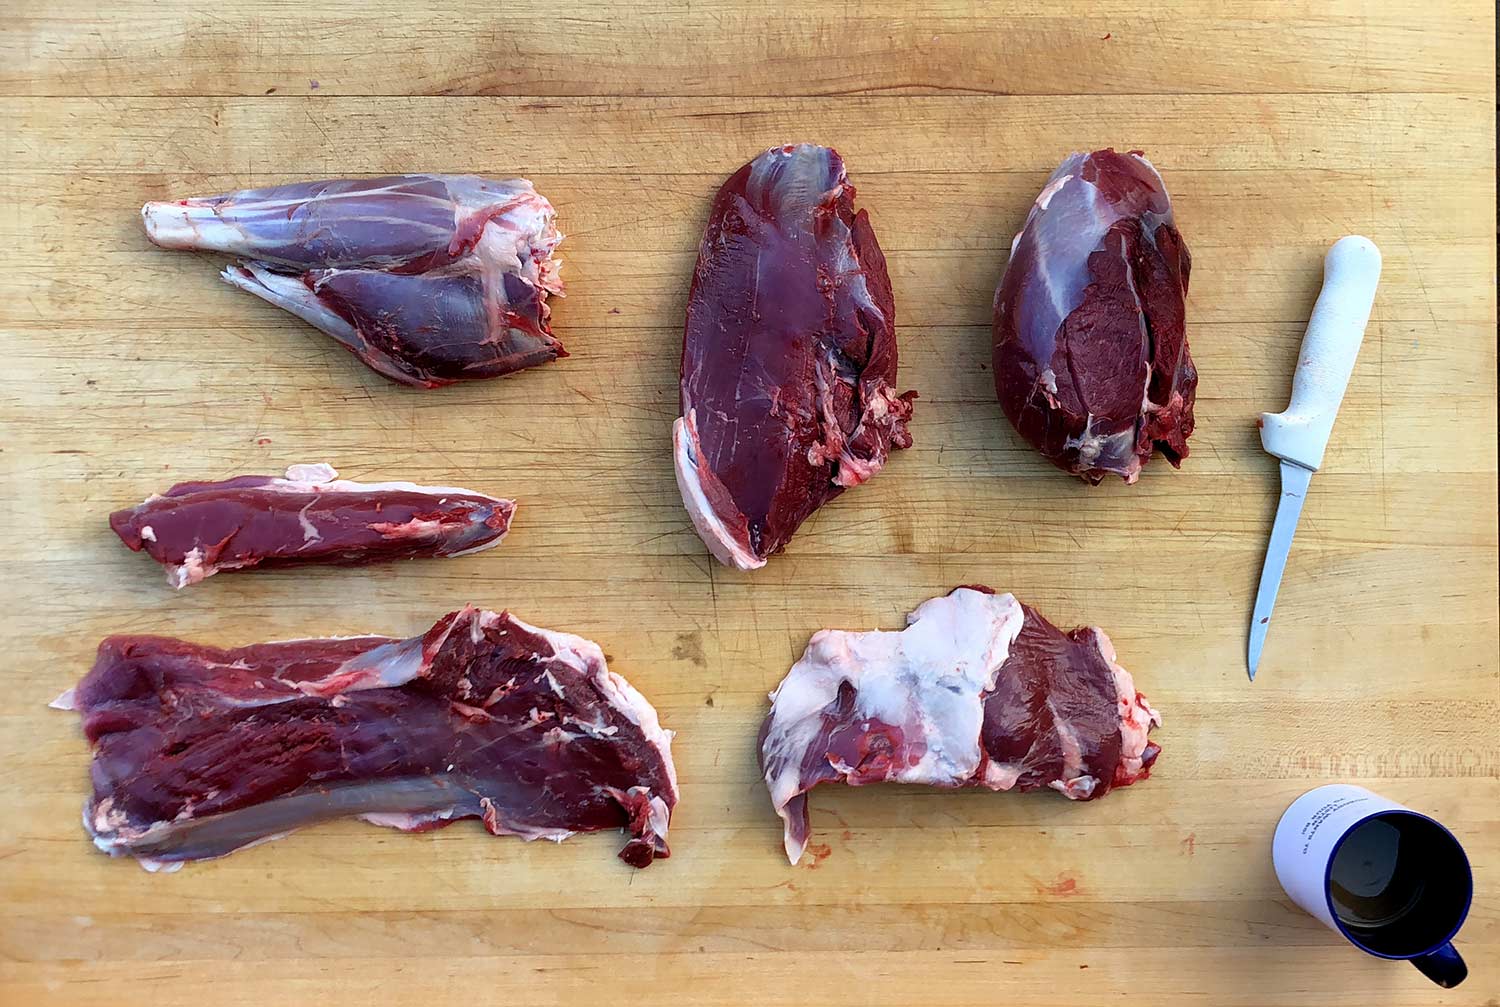 A collection of quartered and trimmed wild game meat on a wooden table.